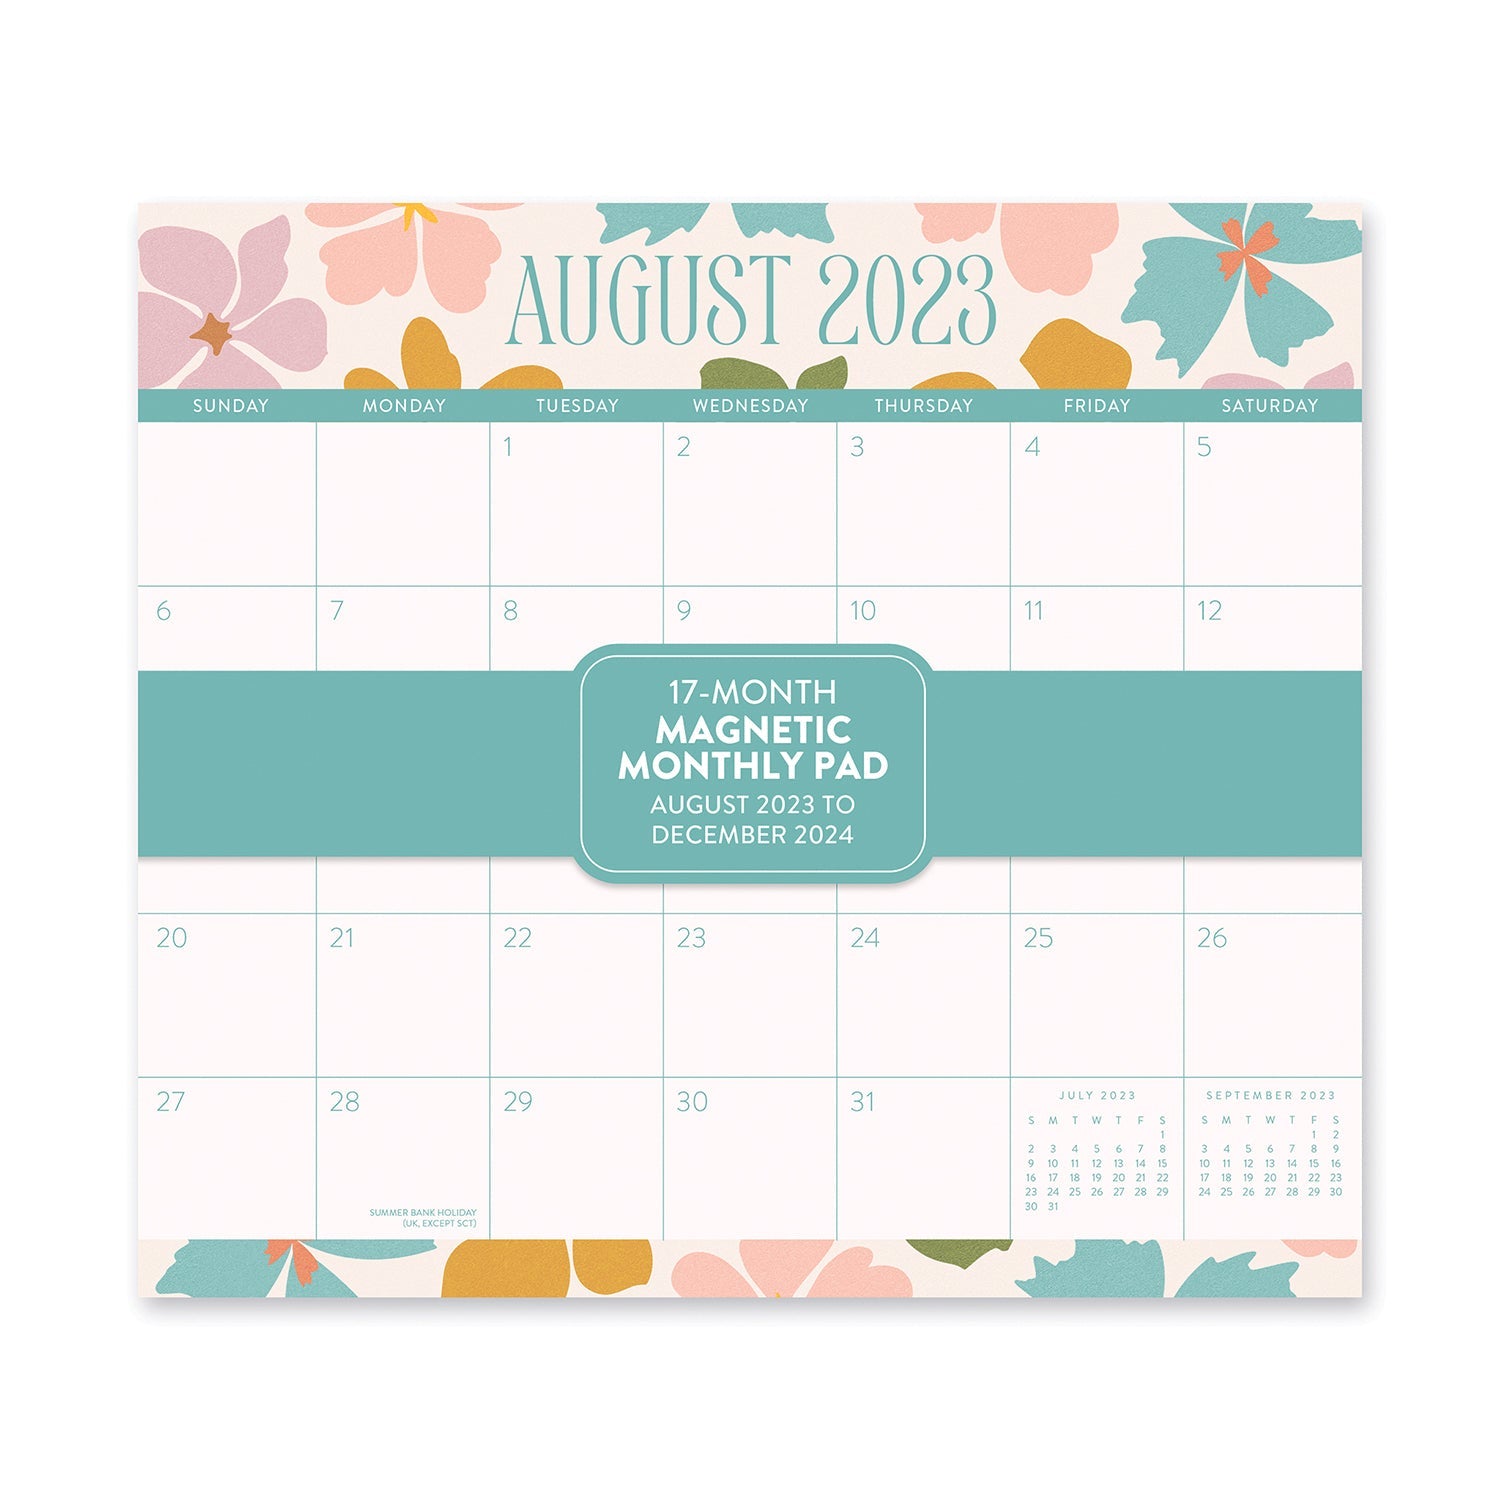 2024 Modern Floral - Monthly Magnetic Pad Calendar